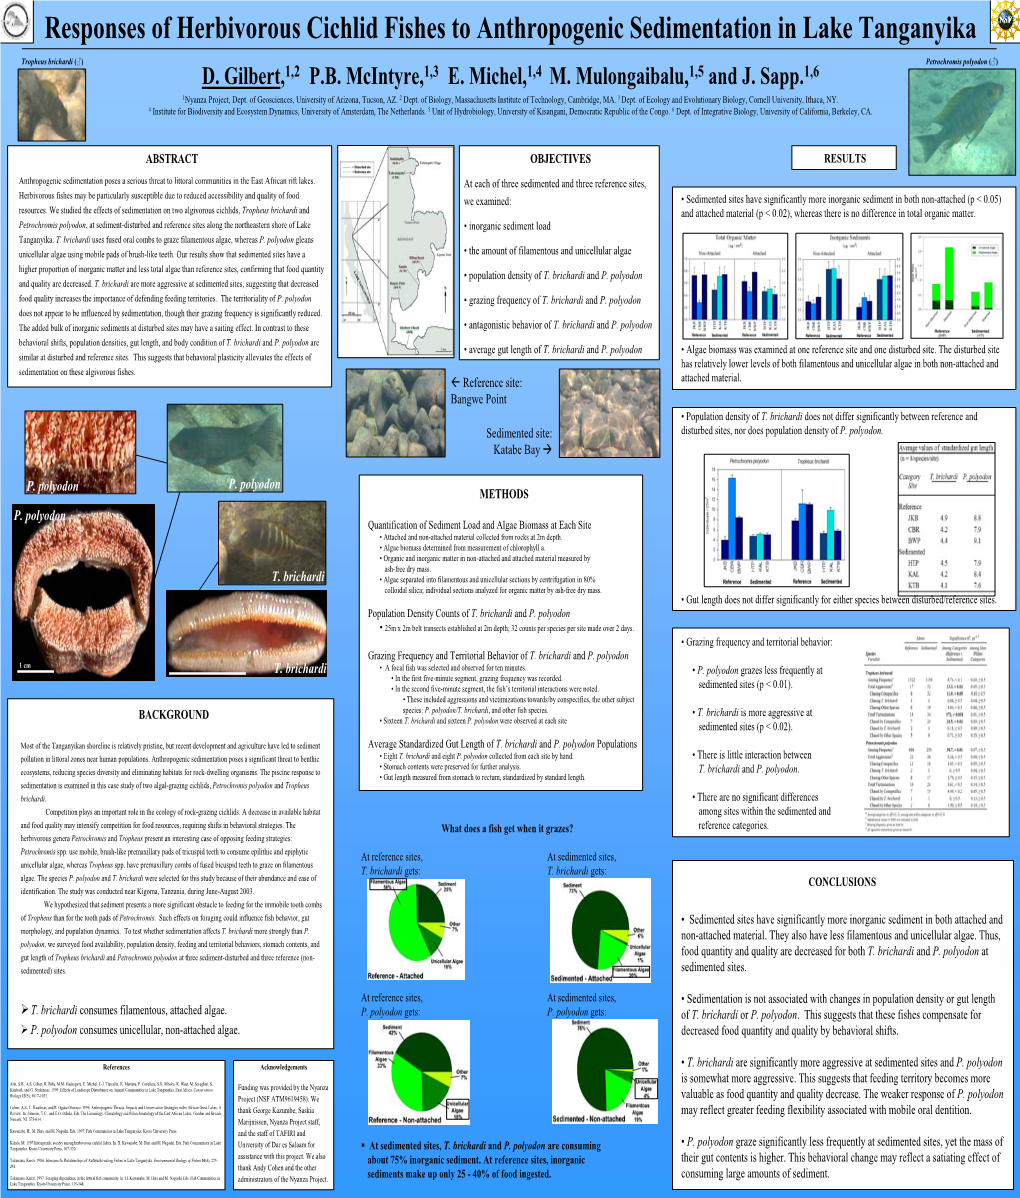 Impact of Sediment Pollution in Lake Tanganyika: a Case Study of Two